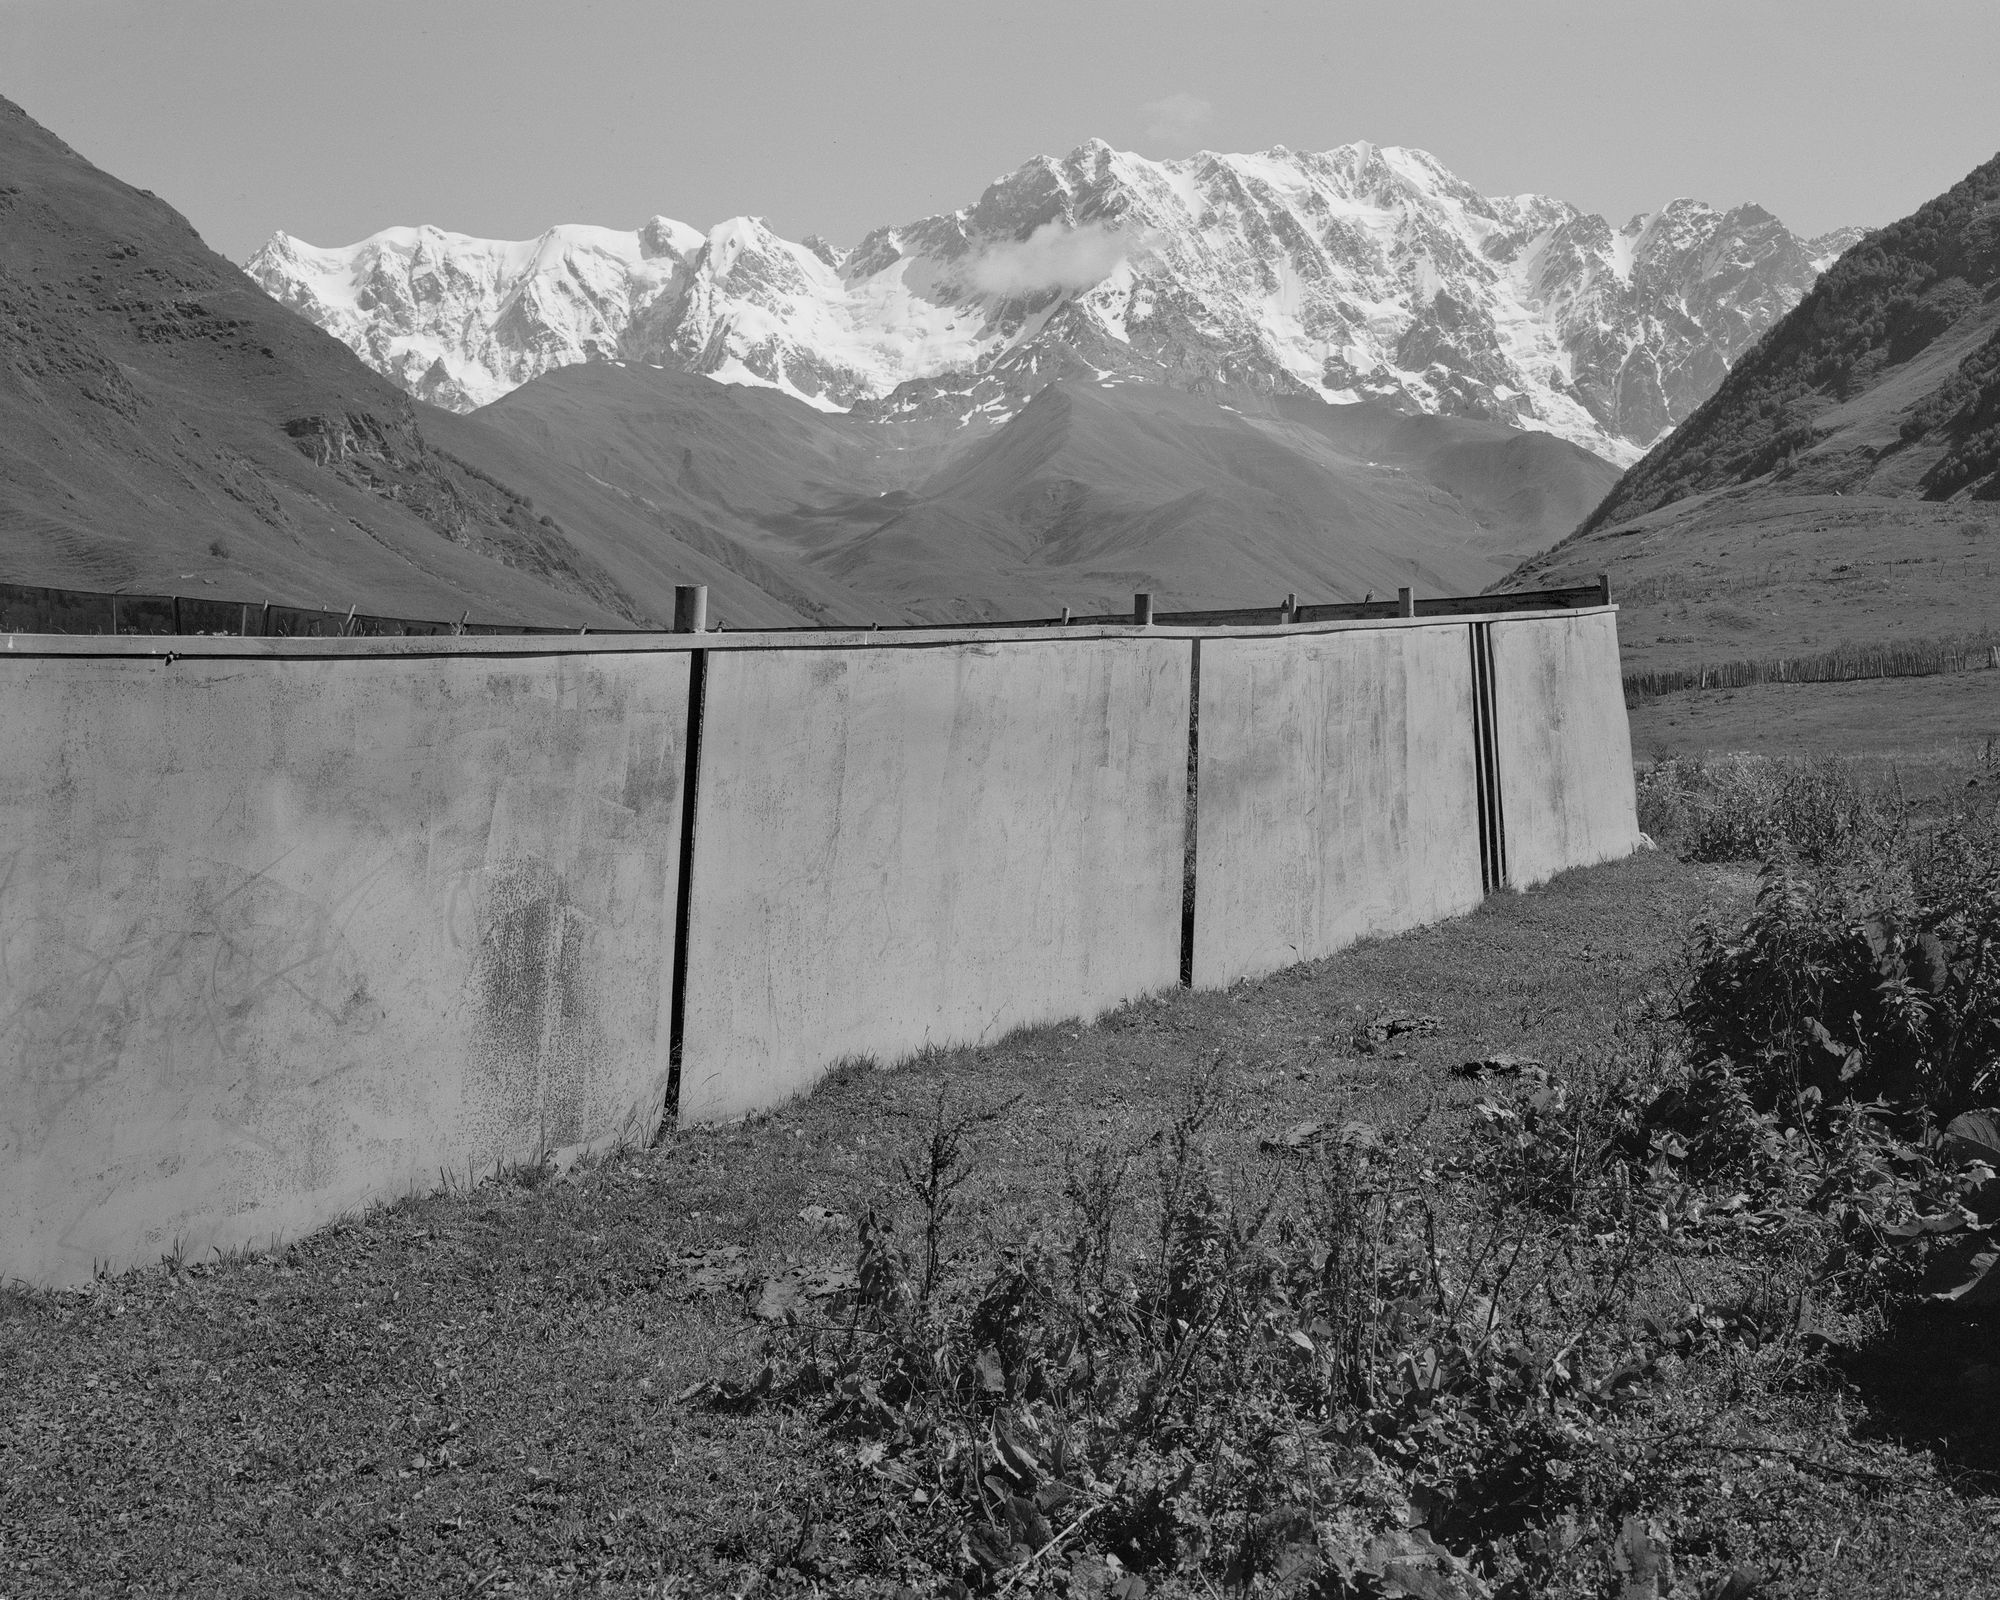 Black and white photo of a gate in a mountainous valley